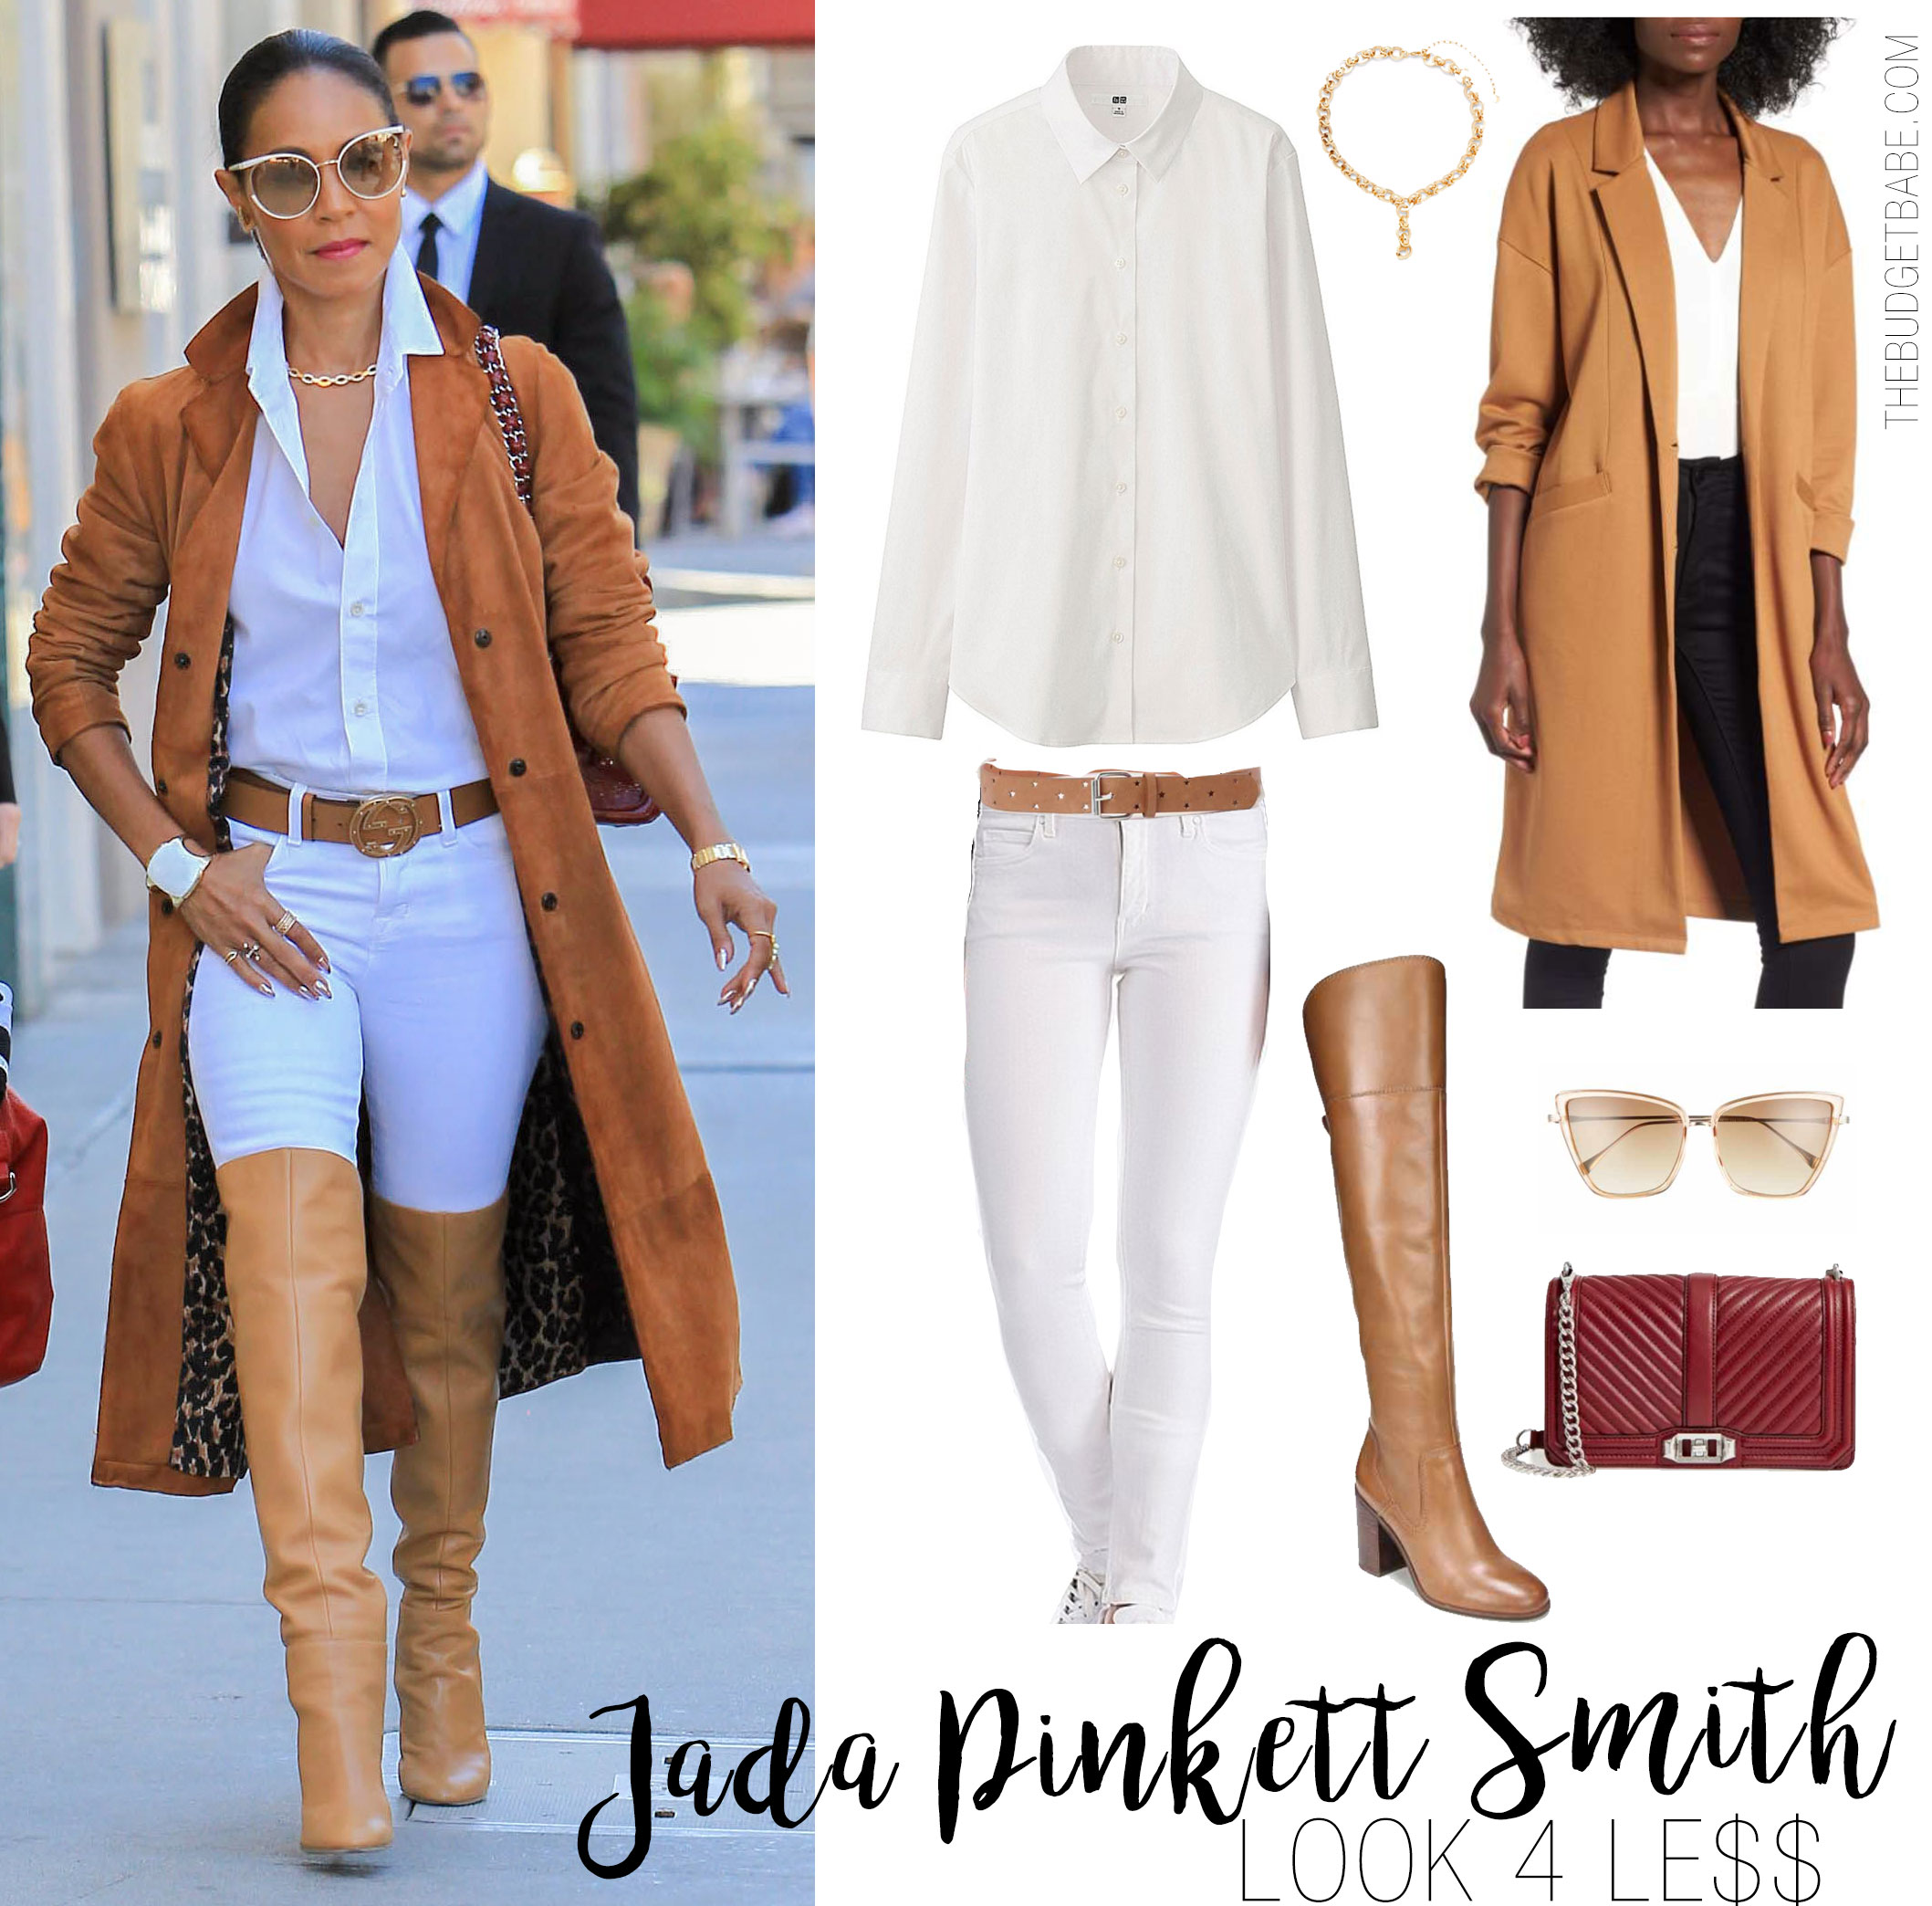 Jada Pinkett Smith wears a camel suede trench coat with a white button-down shirt, white skinny jeans, and cognac over-the-knee boots.